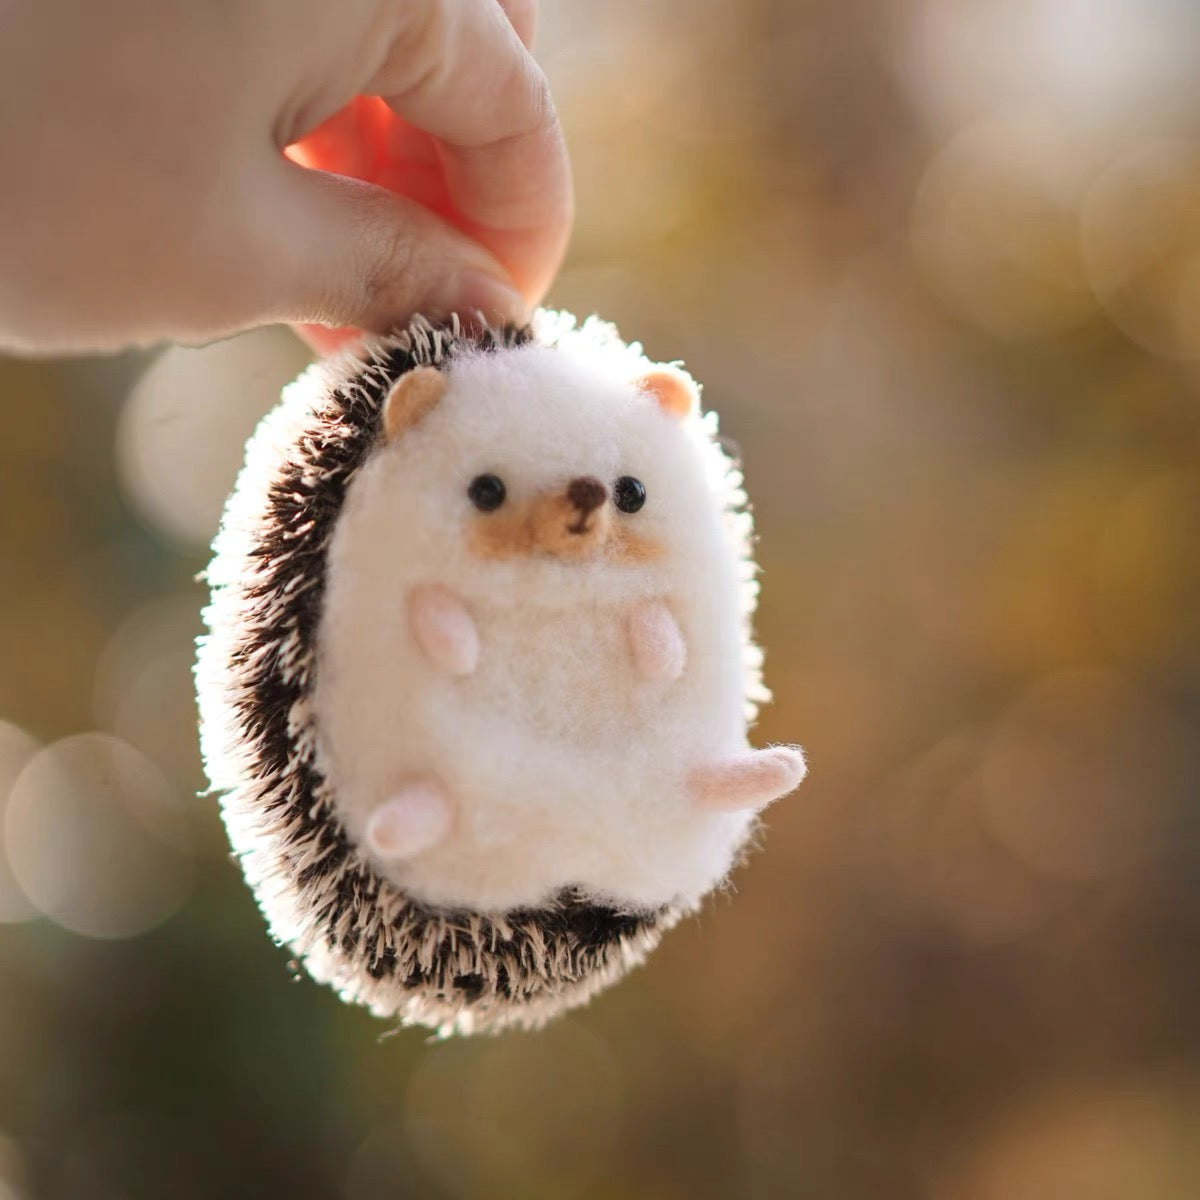 Needle felted wool Felting 《Hedgehogs》Material Kit Handmade Craft Valentine's Day Gift 025